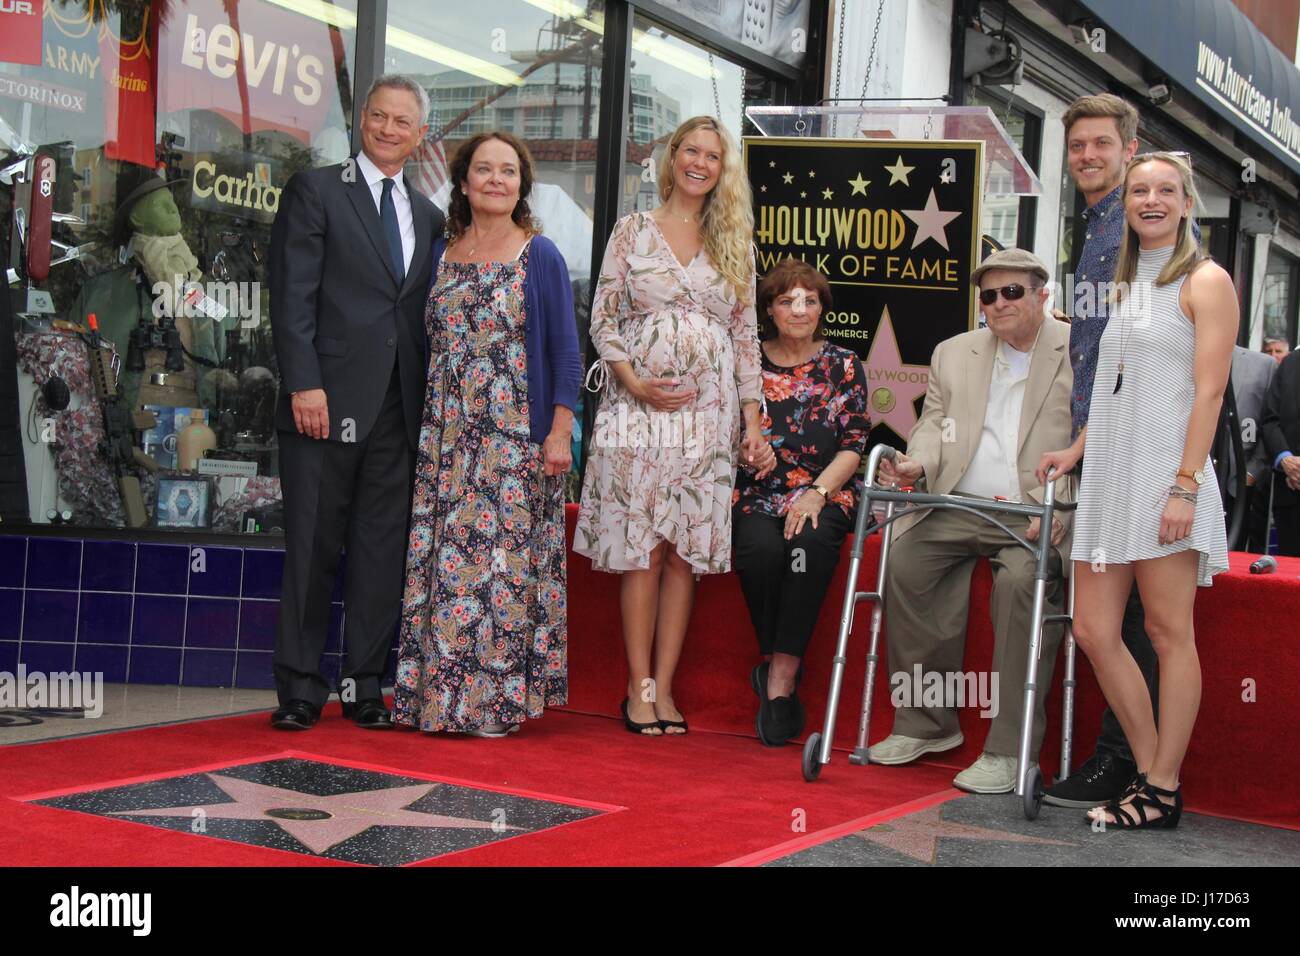 Hollywood, California, USA. 17th Apr, 2017. I15899CHW.Gary Sinise Honored With Star On The Hollywood Walk Of Fame .6664 Hollywood Boulevard in front of The Supply Sergeant, Hollyood, CA.04/17/2017.GARY SINISE WITH WIFE MOIRA HARRIS AND SINISE FAMILY . © Clinton H.Wallace/Photomundo International/ Photos Inc Credit: Clinton Wallace/Globe Photos/ZUMA Wire/Alamy Live News Stock Photo